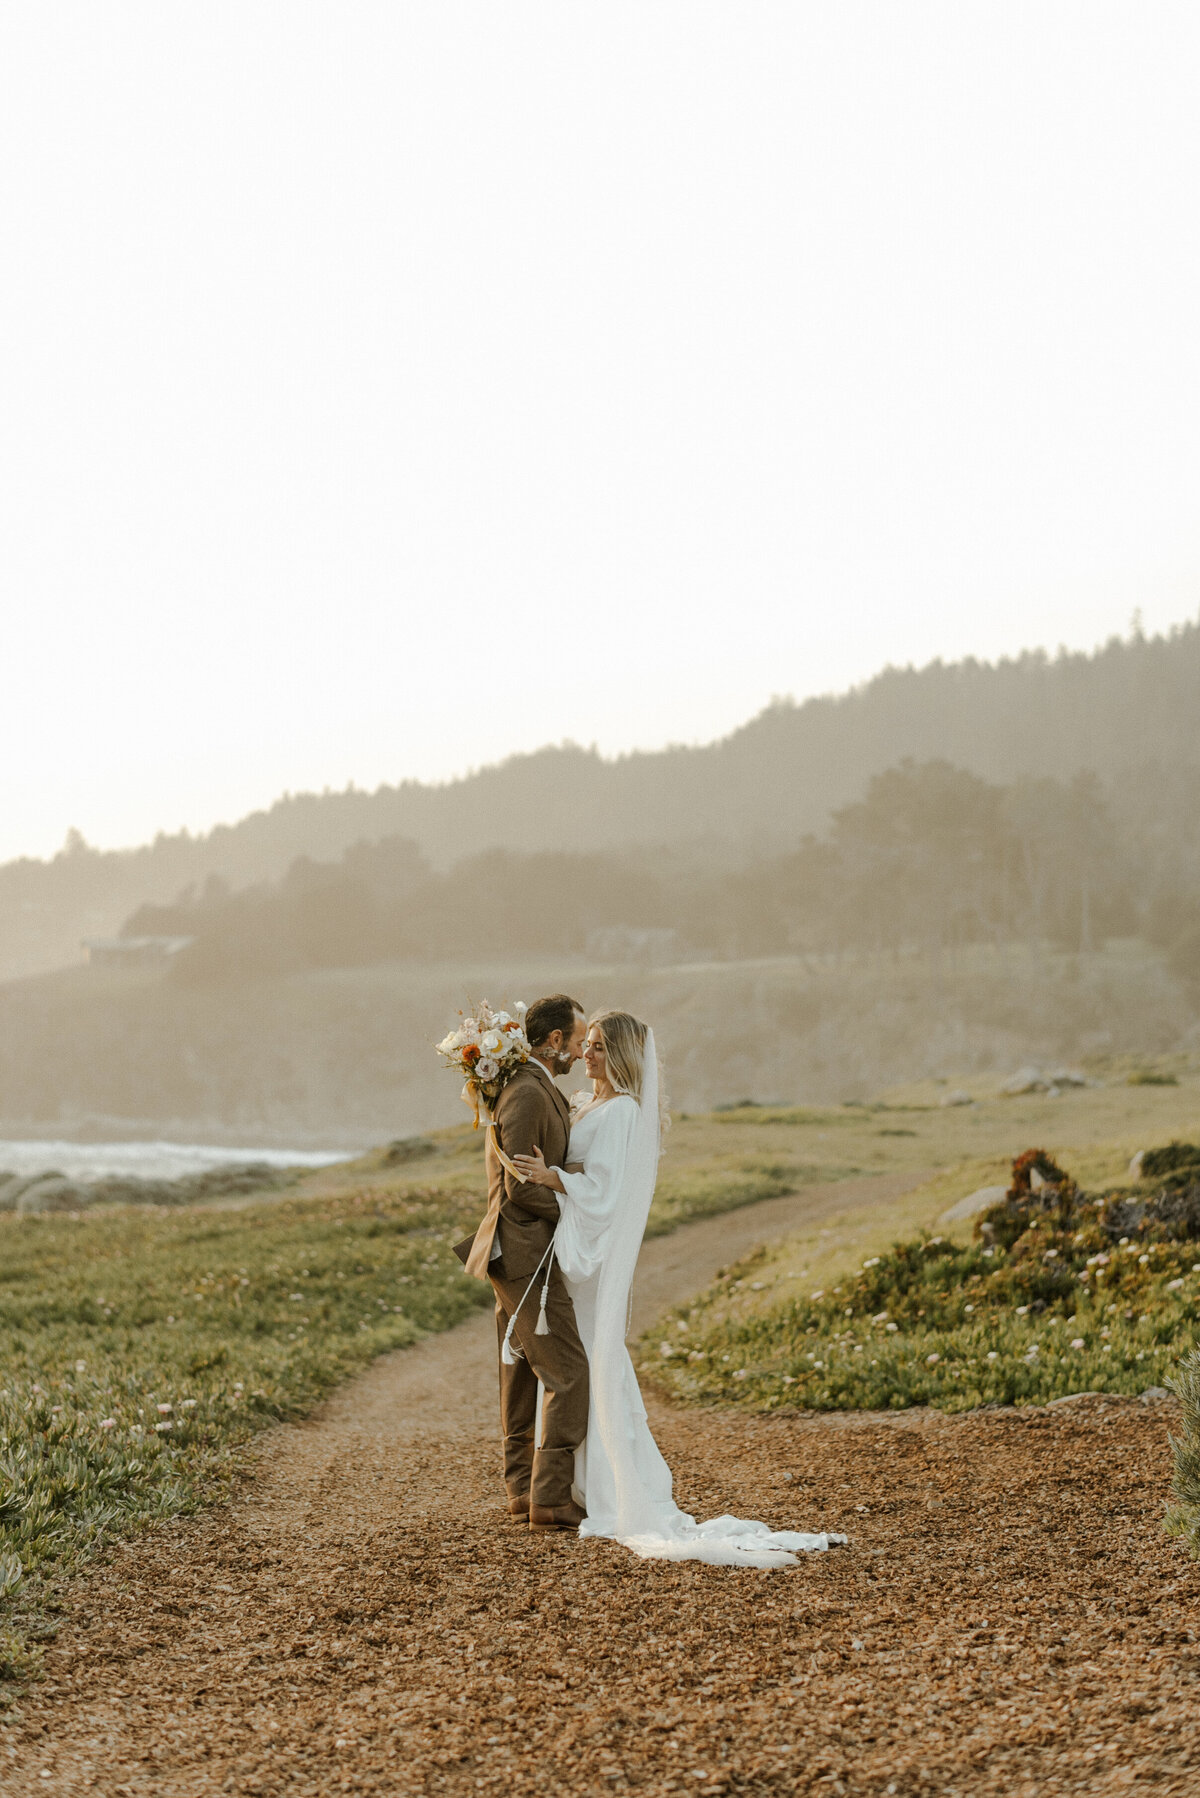 C & T at Timber Cove, Sonoma County 49